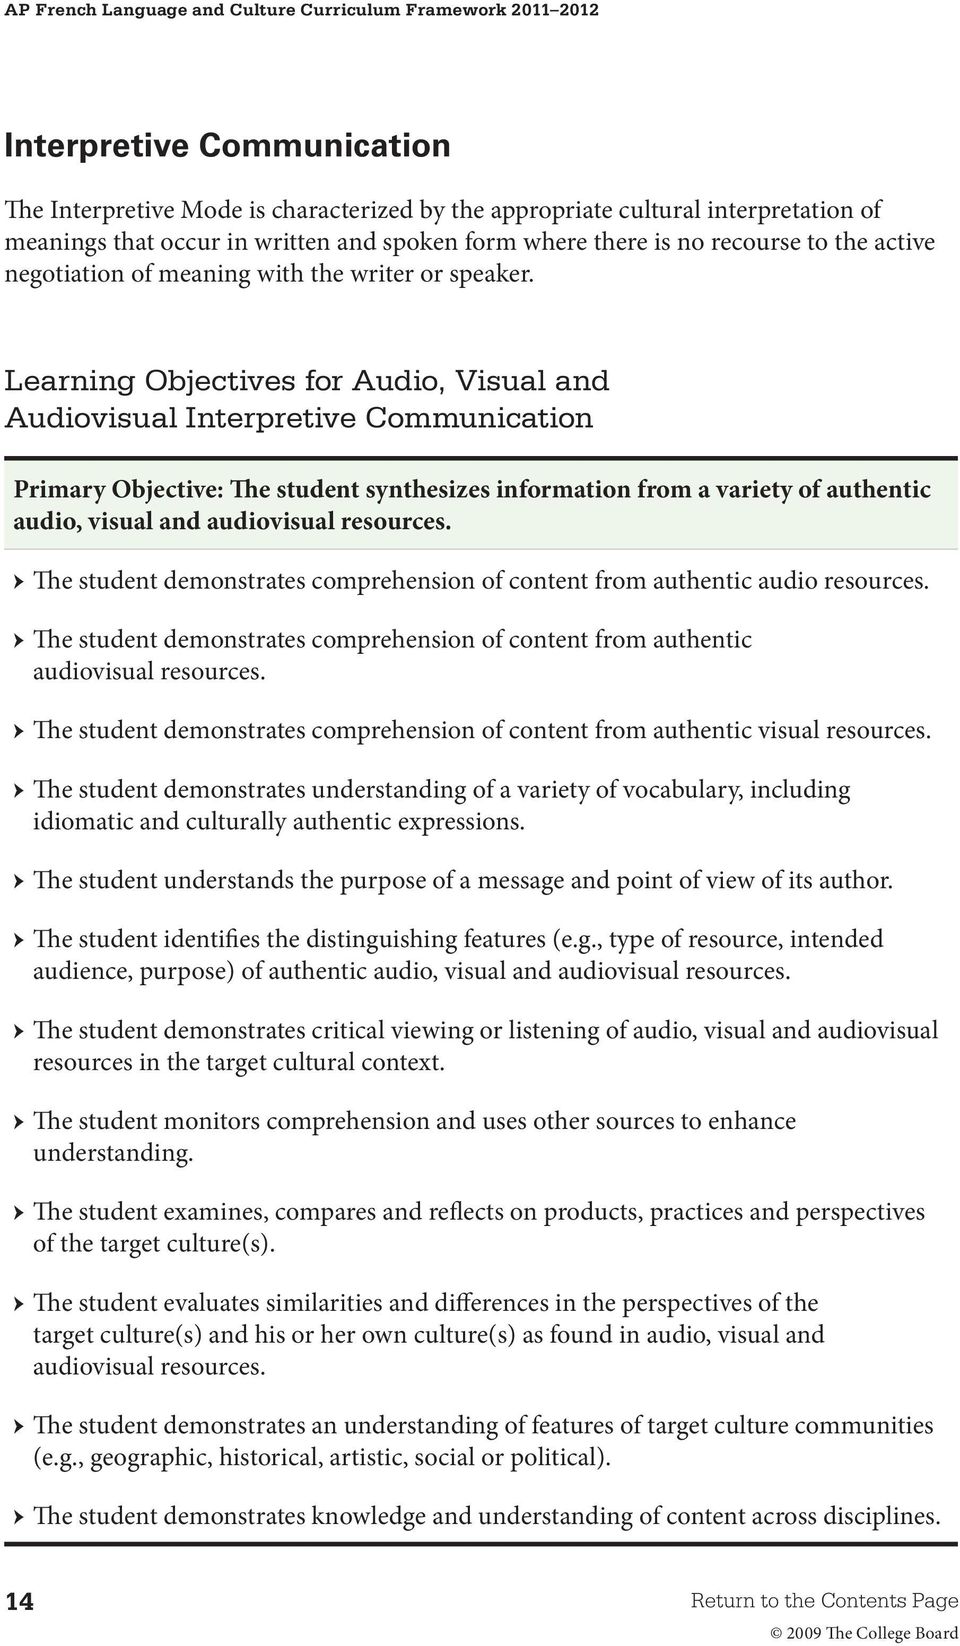 Learning Objectives for Audio, Visual and Audiovisual Interpretive Communication Primary Objective: The student synthesizes information from a variety of authentic audio, visual and audiovisual